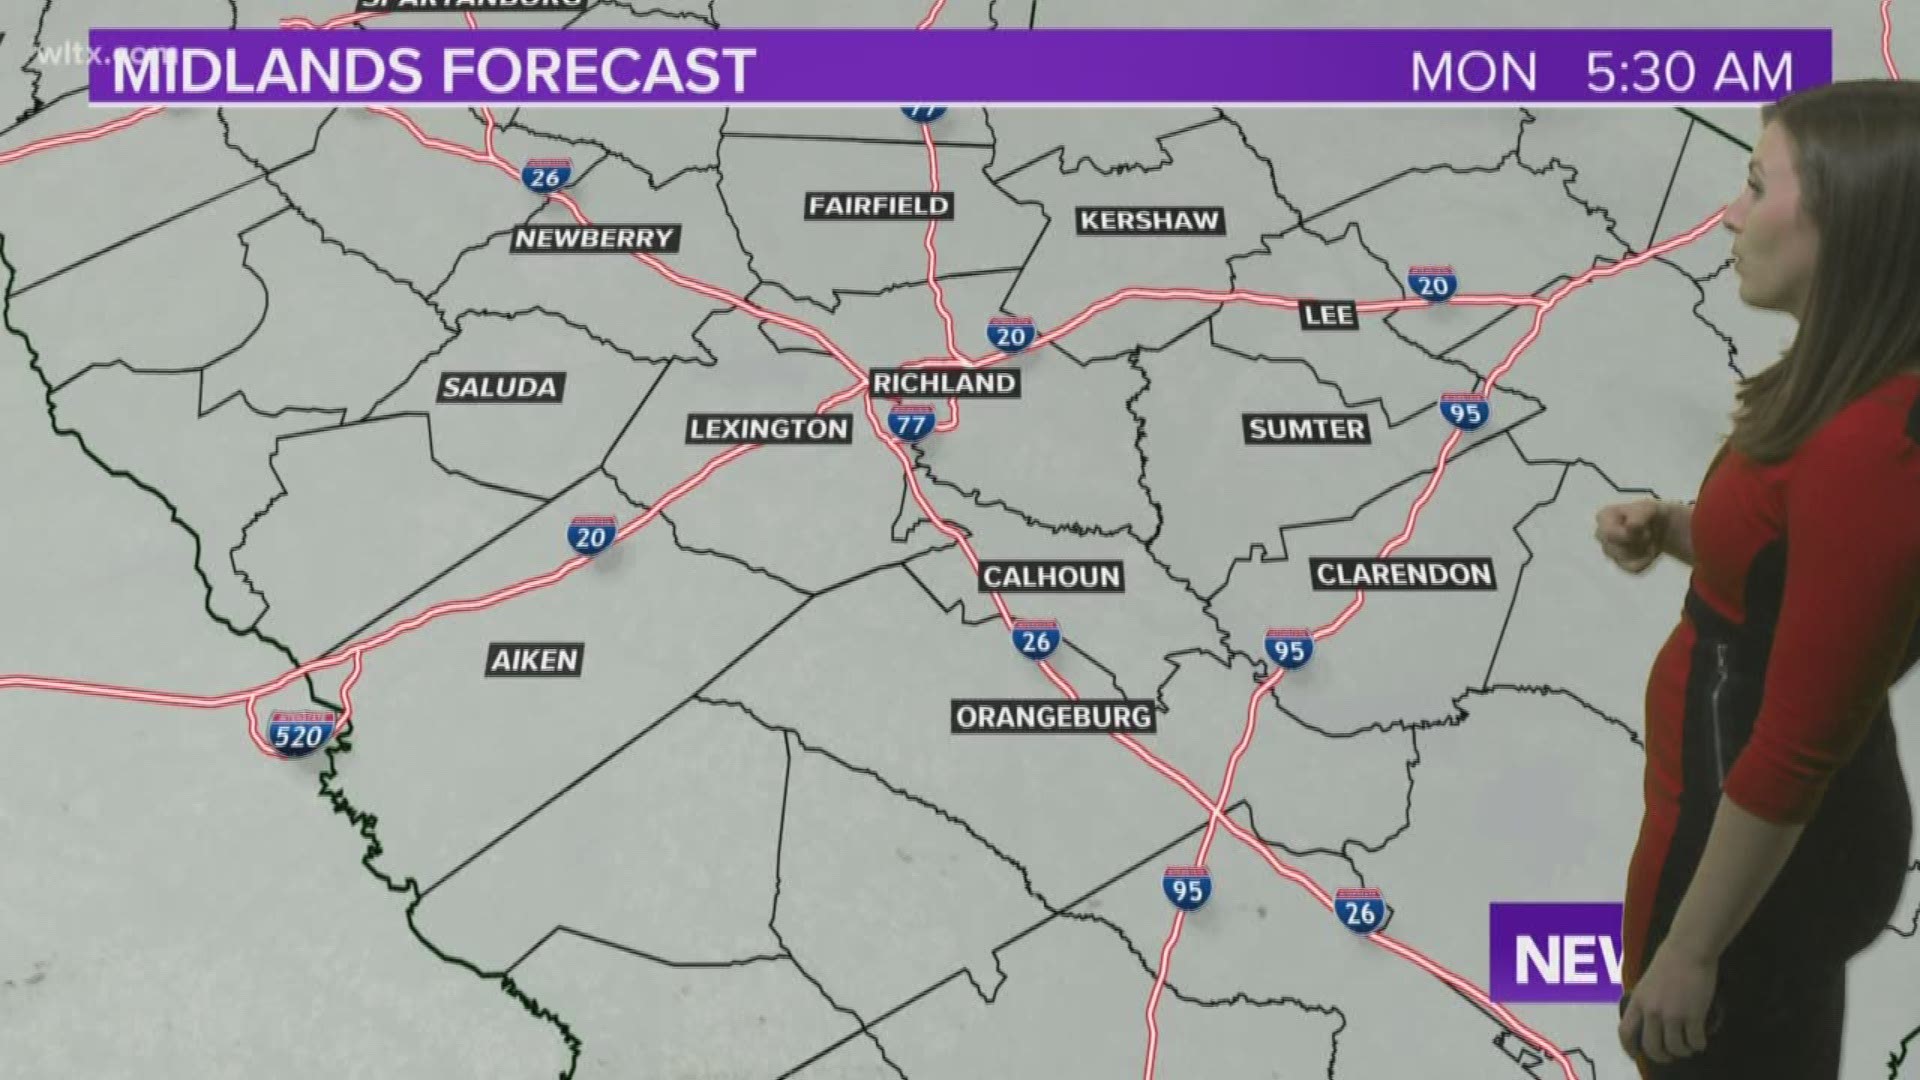 Clouds build overnight with the chance of rain increasing through Monday afternoon. Temperatures remain cool.